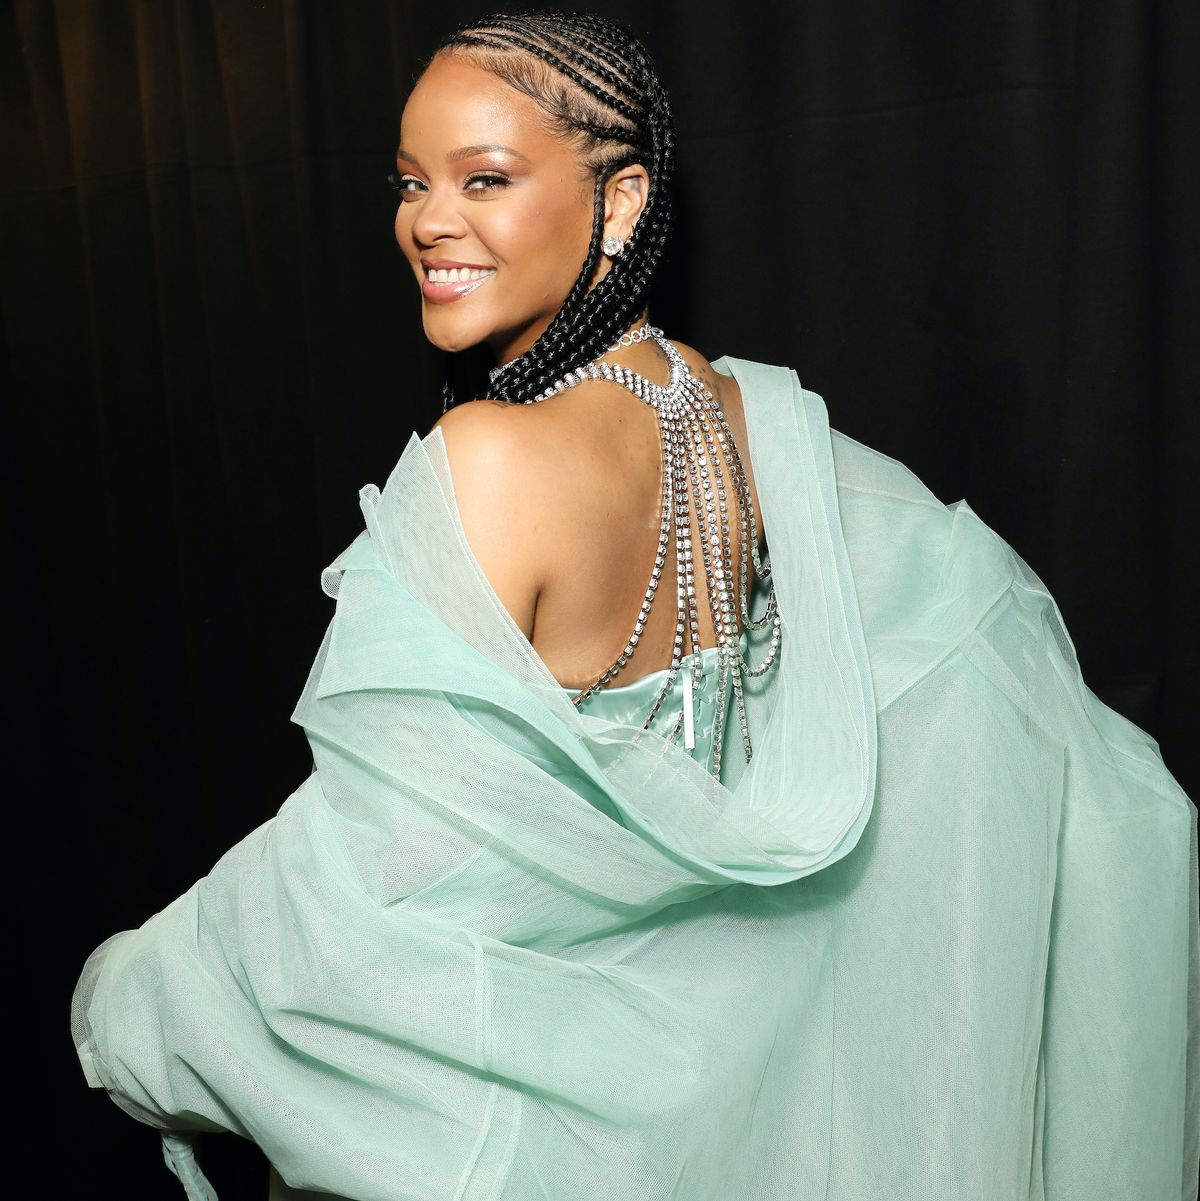 london, england   december 02 rihanna backstage stage during the fashion awards 2019 held at royal albert hall on december 02, 2019 in london, england photo by darren gerrishgetty images